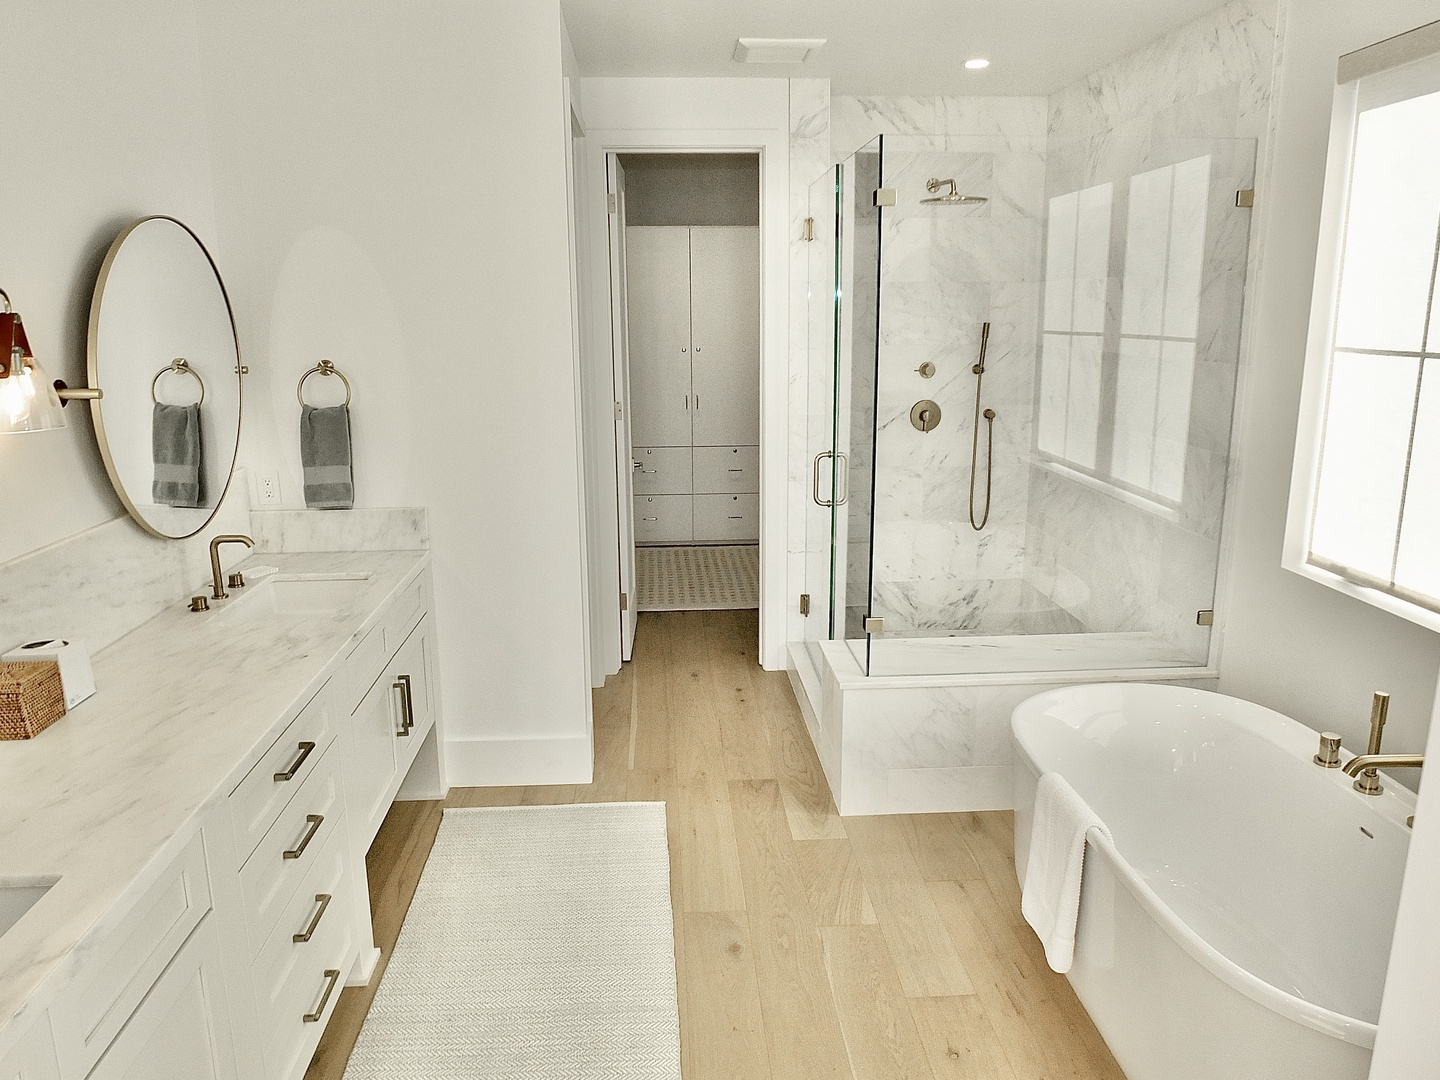 This ensuite features a dual vanity, glass shower, & luxe soaking tub